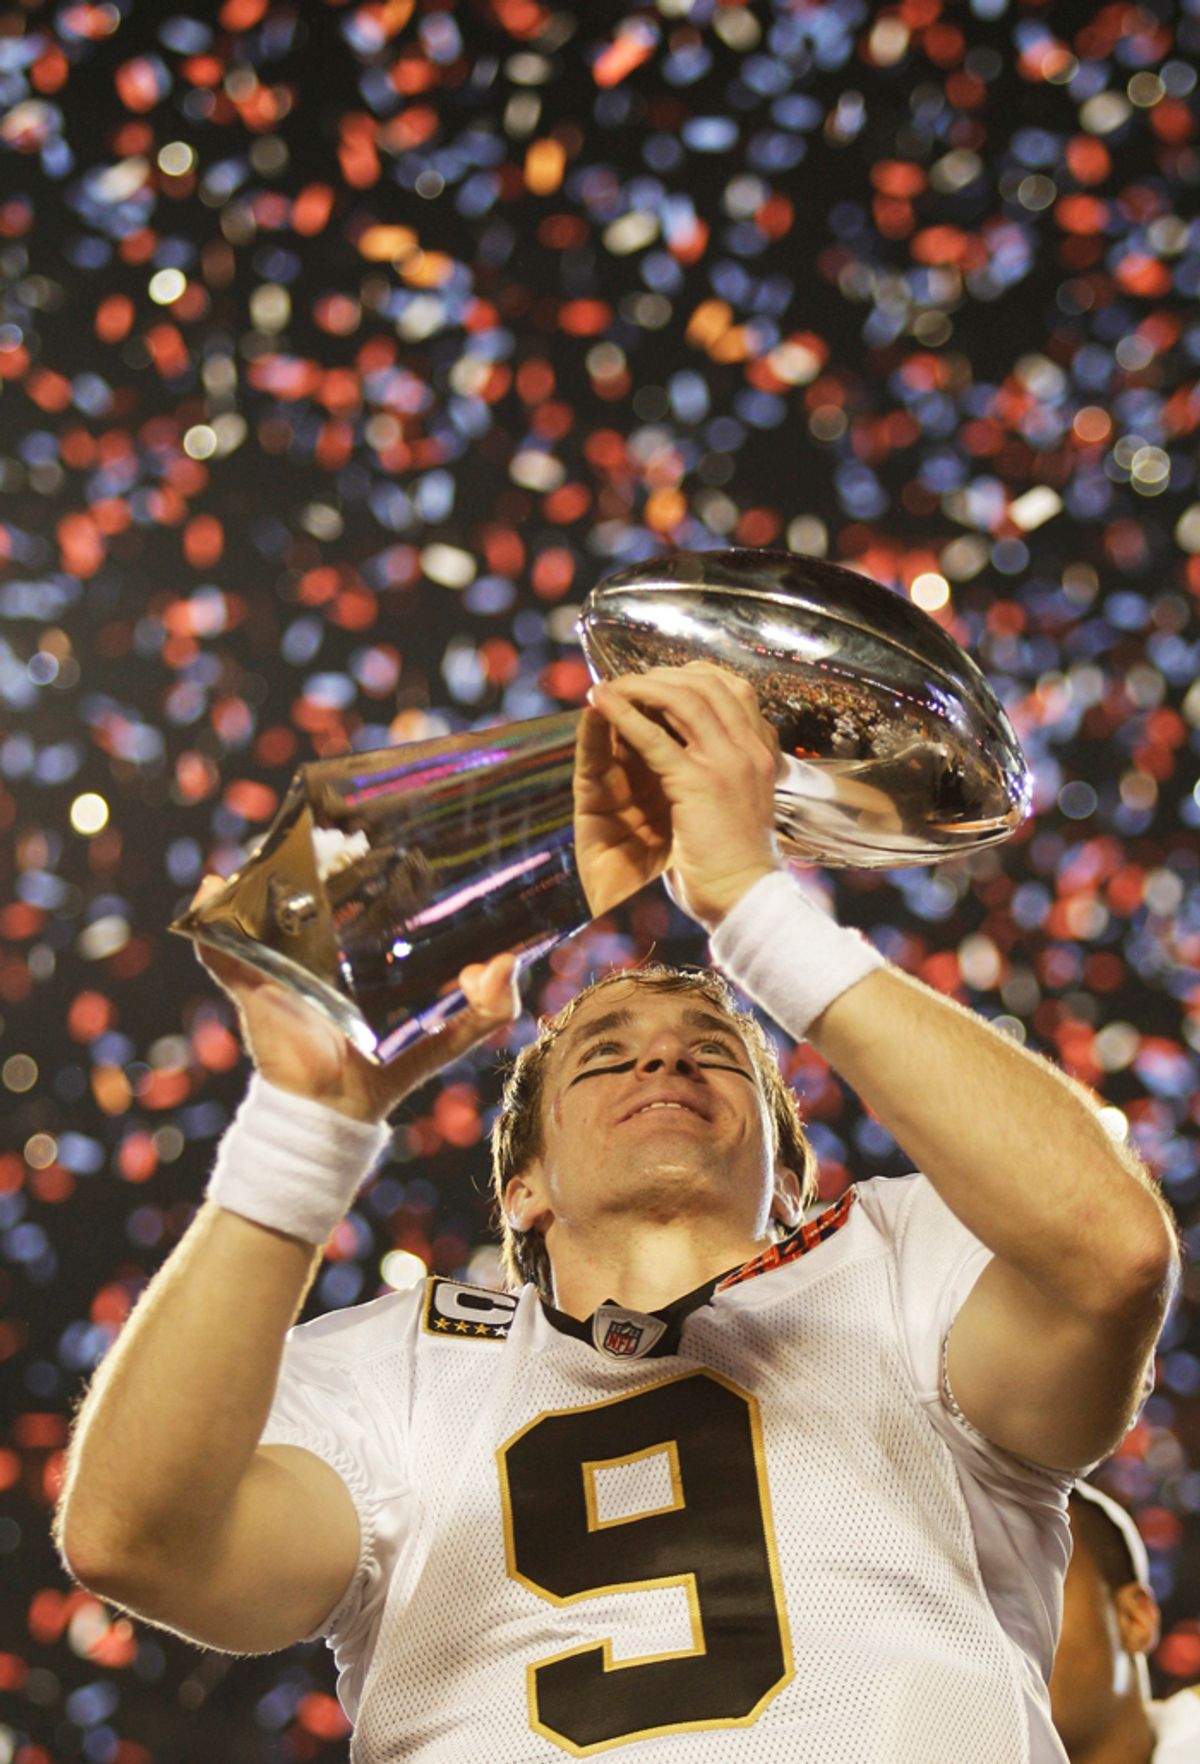 FILE - This Feb. 7, 2010, file photo shows New Orleans Saints quarterback Drew Brees holding the Vince Lombardi Trophy after the NFL Super Bowl XLIV football game against the Indianapolis Colts,  in Miami.  Brees was voted the 2010 Male Athlete of the Year, chosen by members of The Associated Press, Friday, Dec. 17, 2010. (AP Photo/David J. Phillip, File) (David J. Phillip)